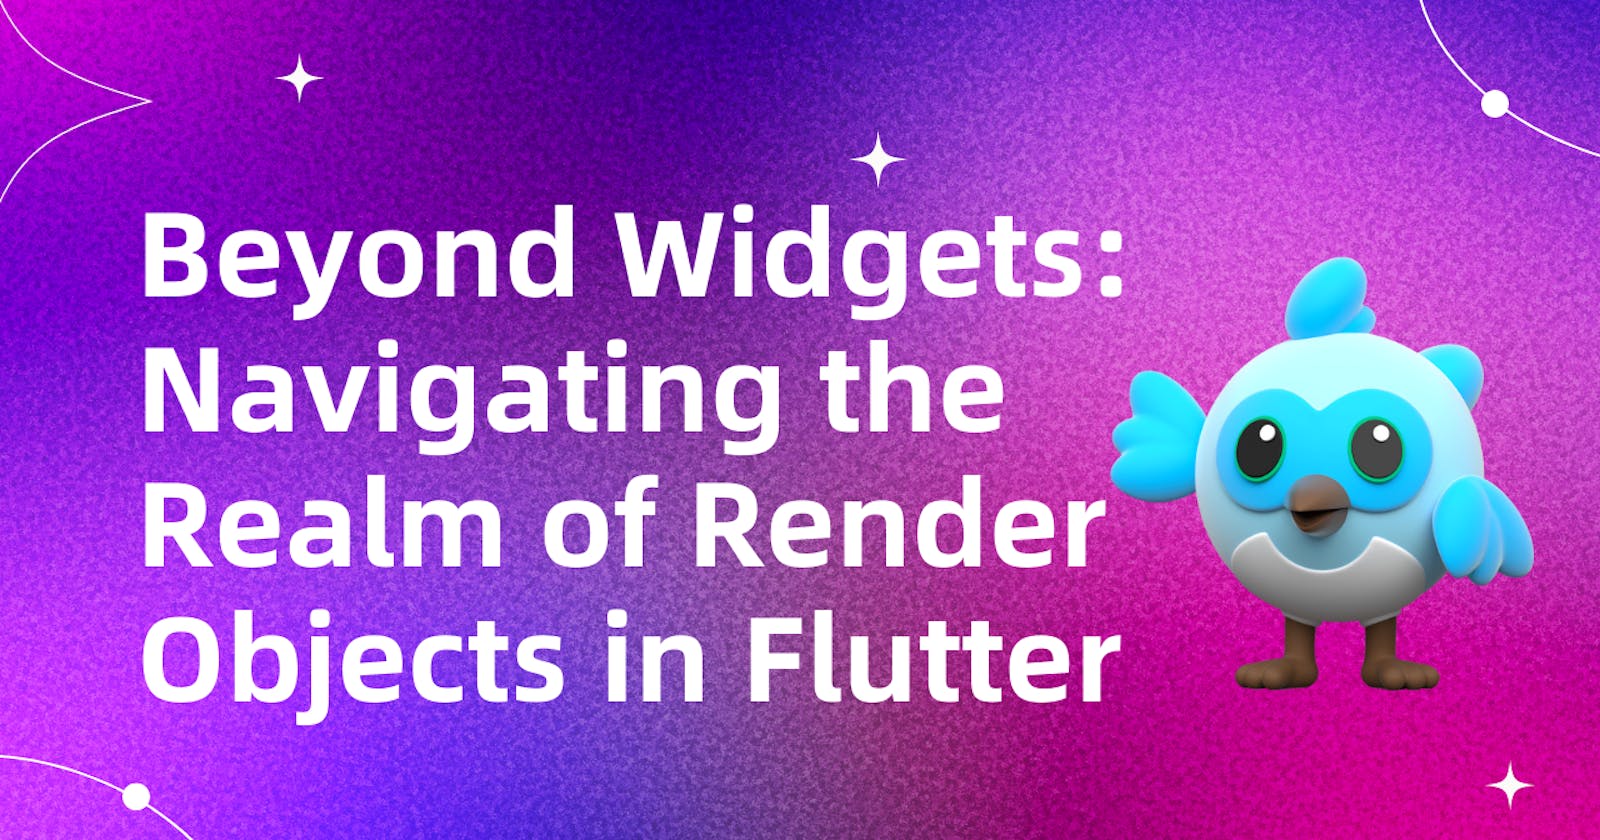 Beyond Widgets: Navigating the Realm of Render Objects in Flutter